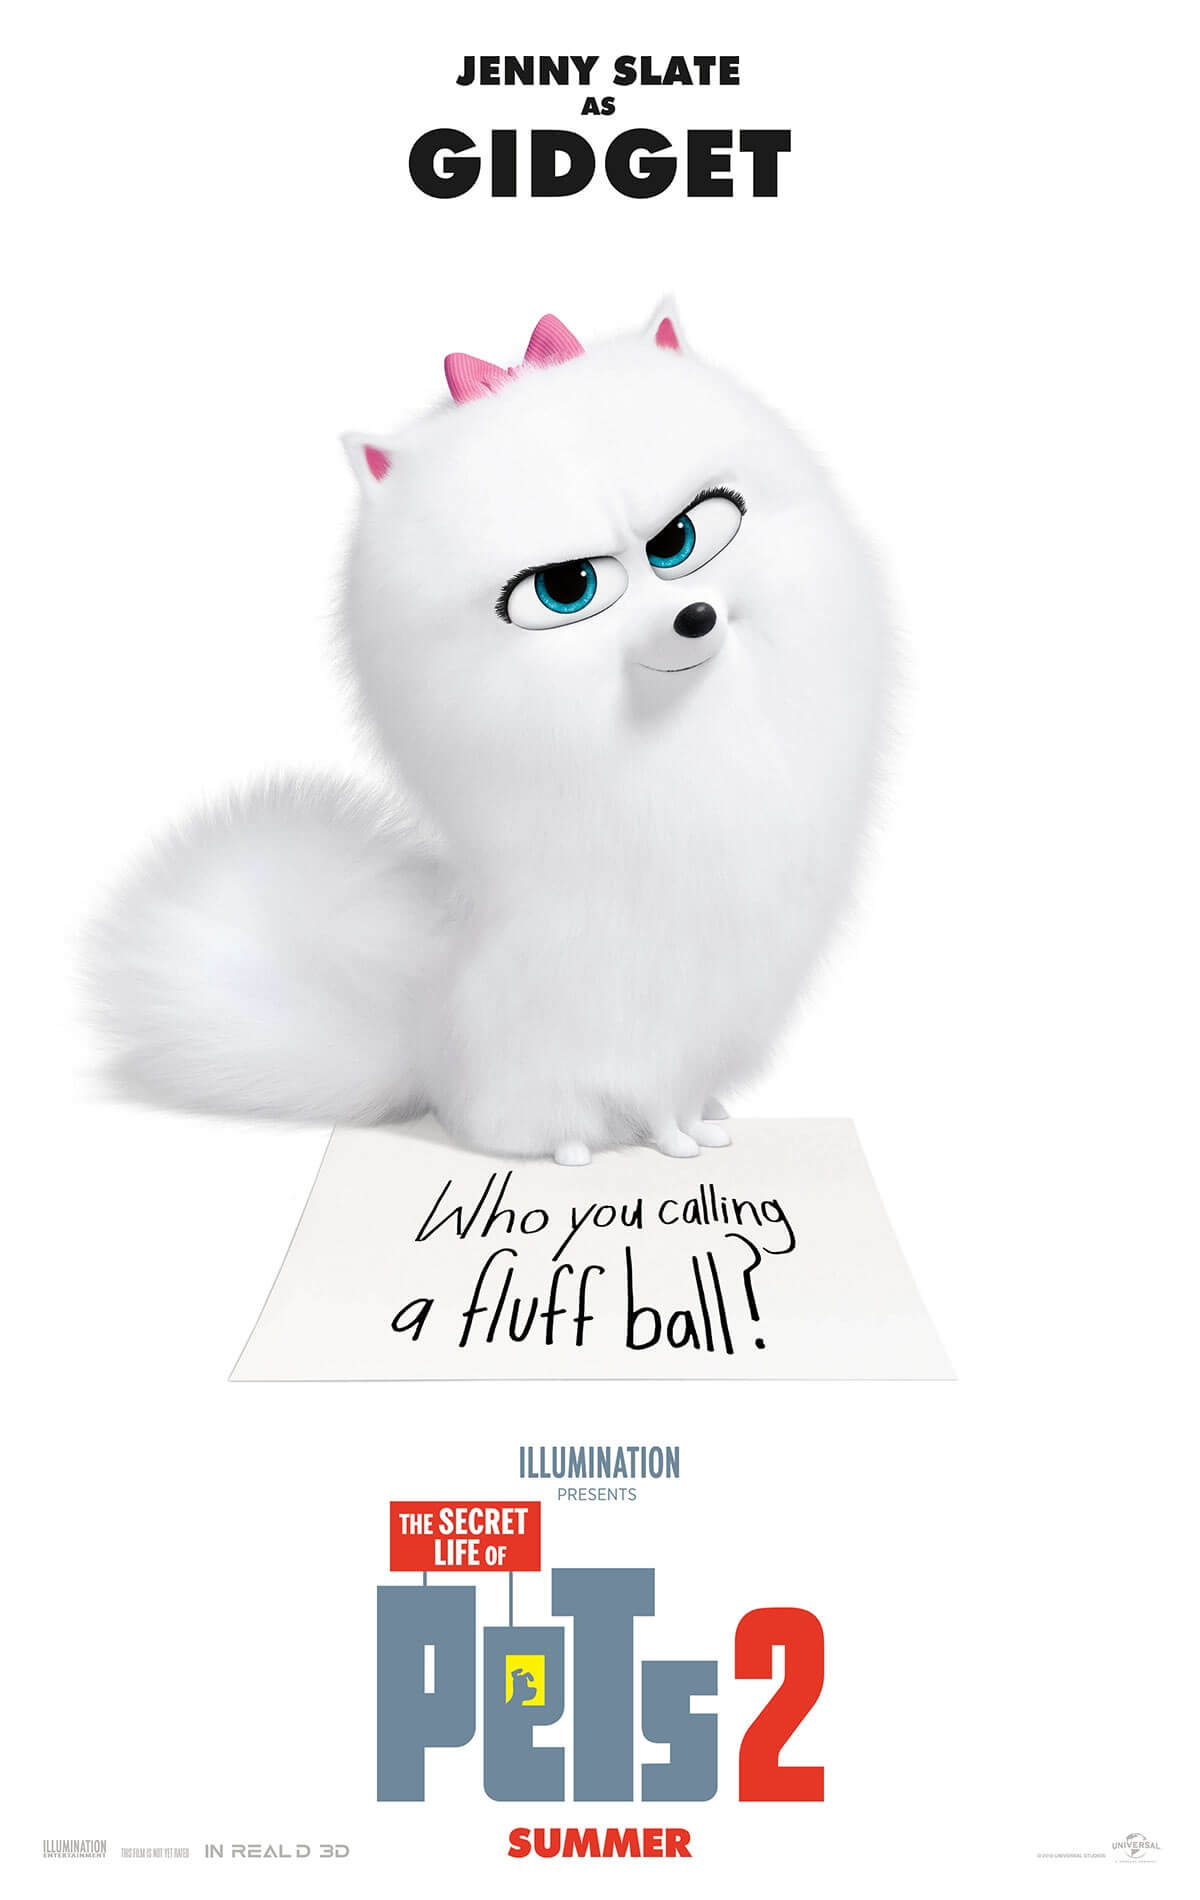 The Secret Life of Pets 2 offical poster